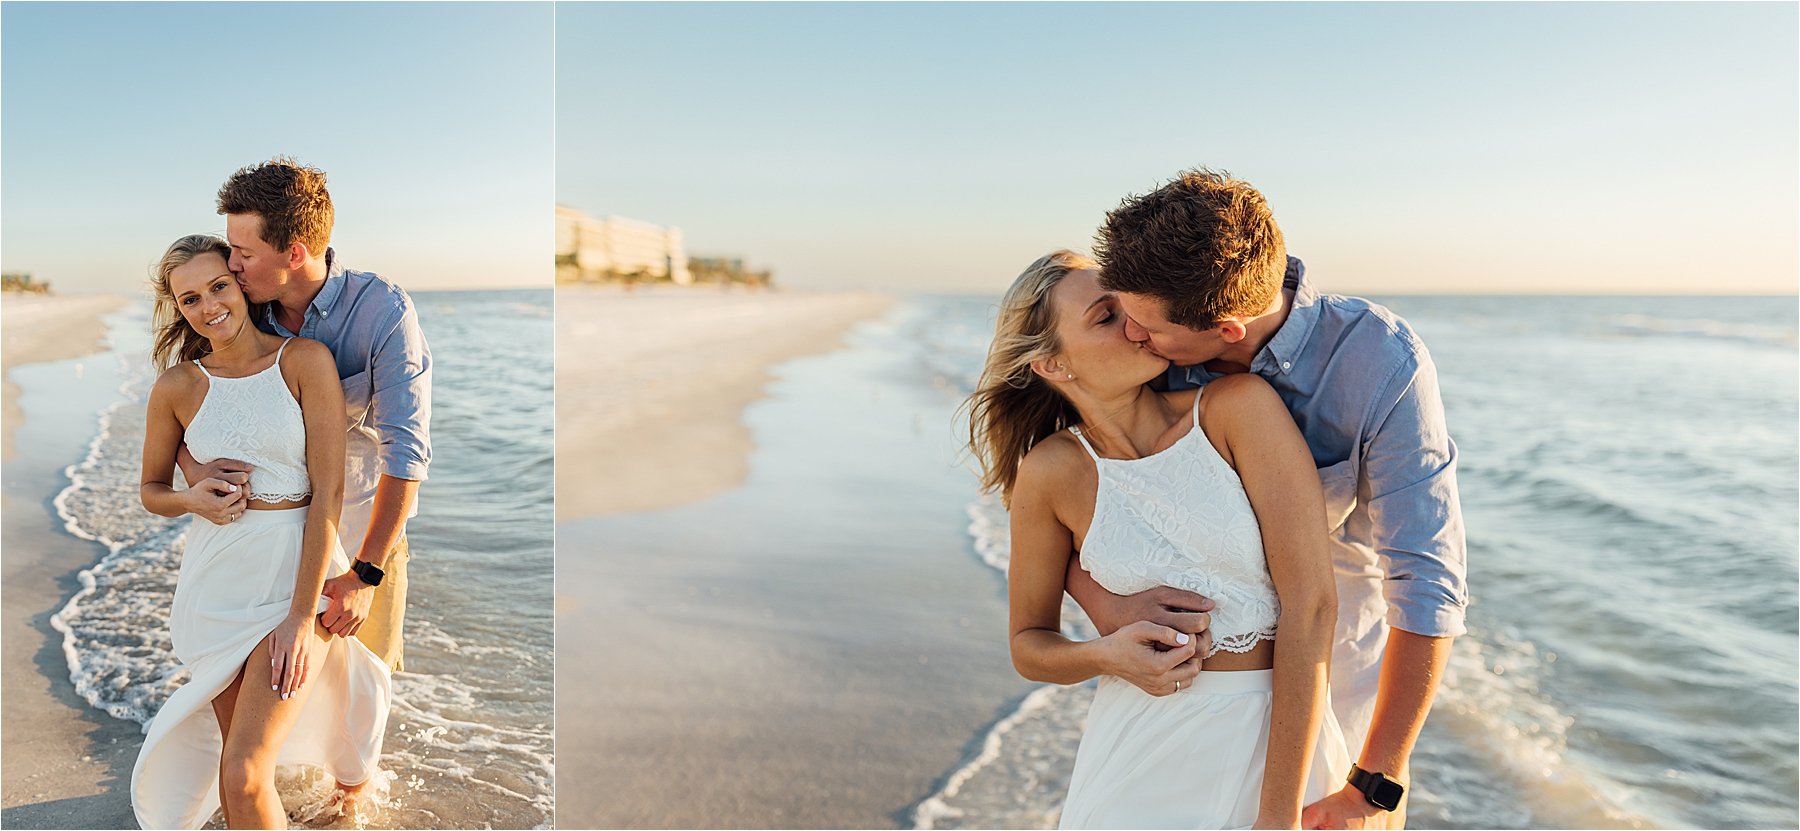 Beach engagement photos close up of kissing